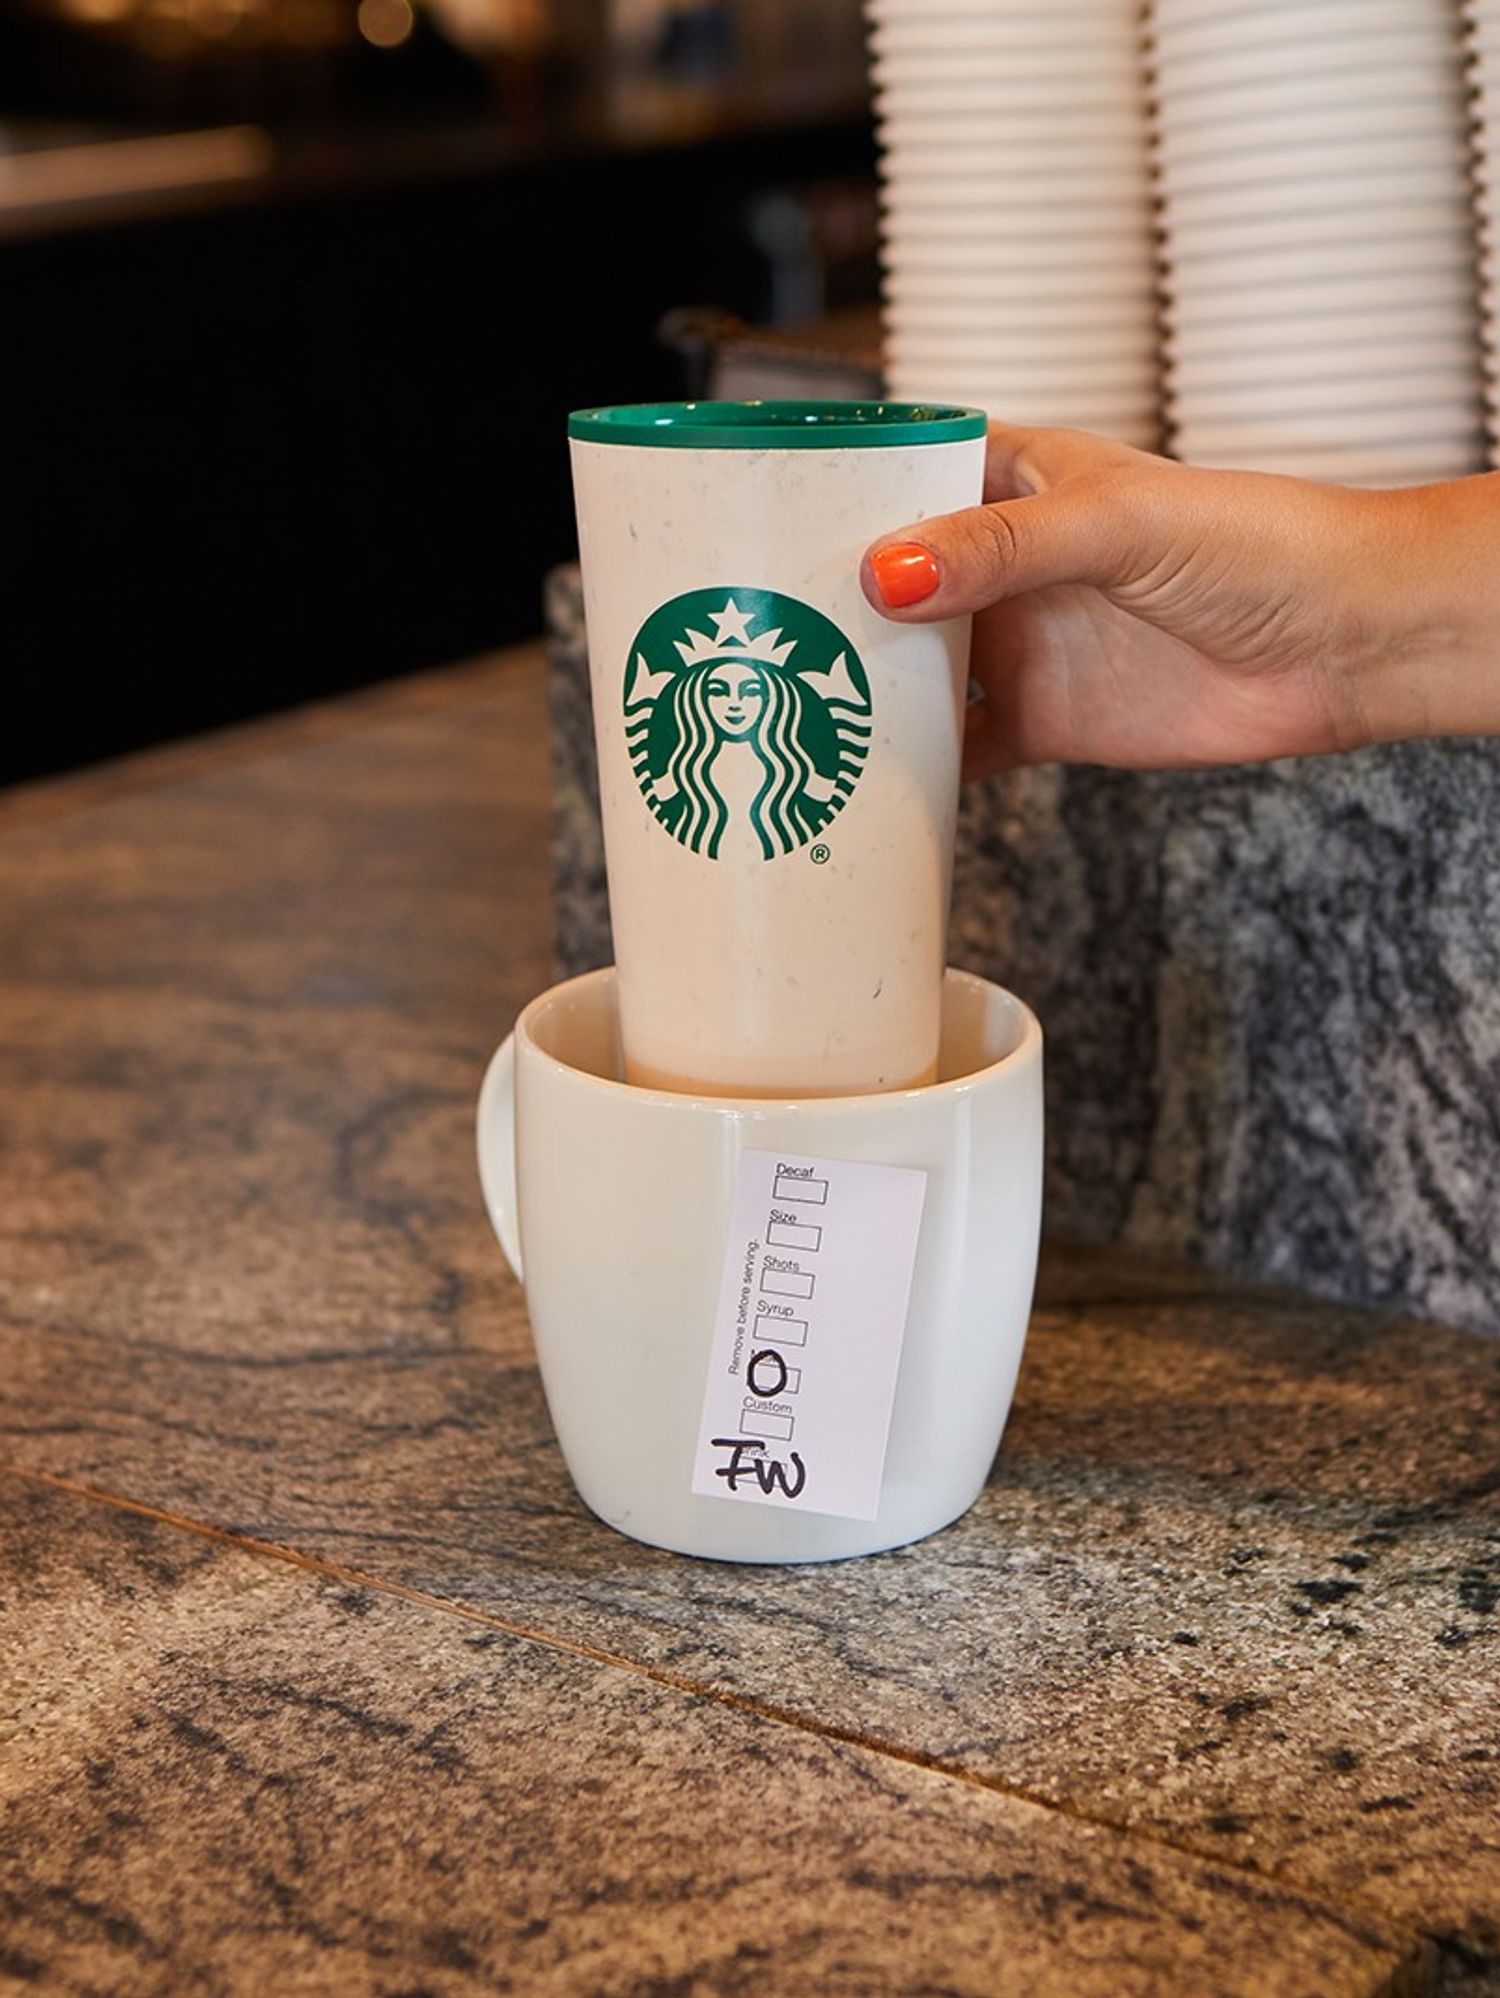 How To Get Free Starbucks with a personal cup